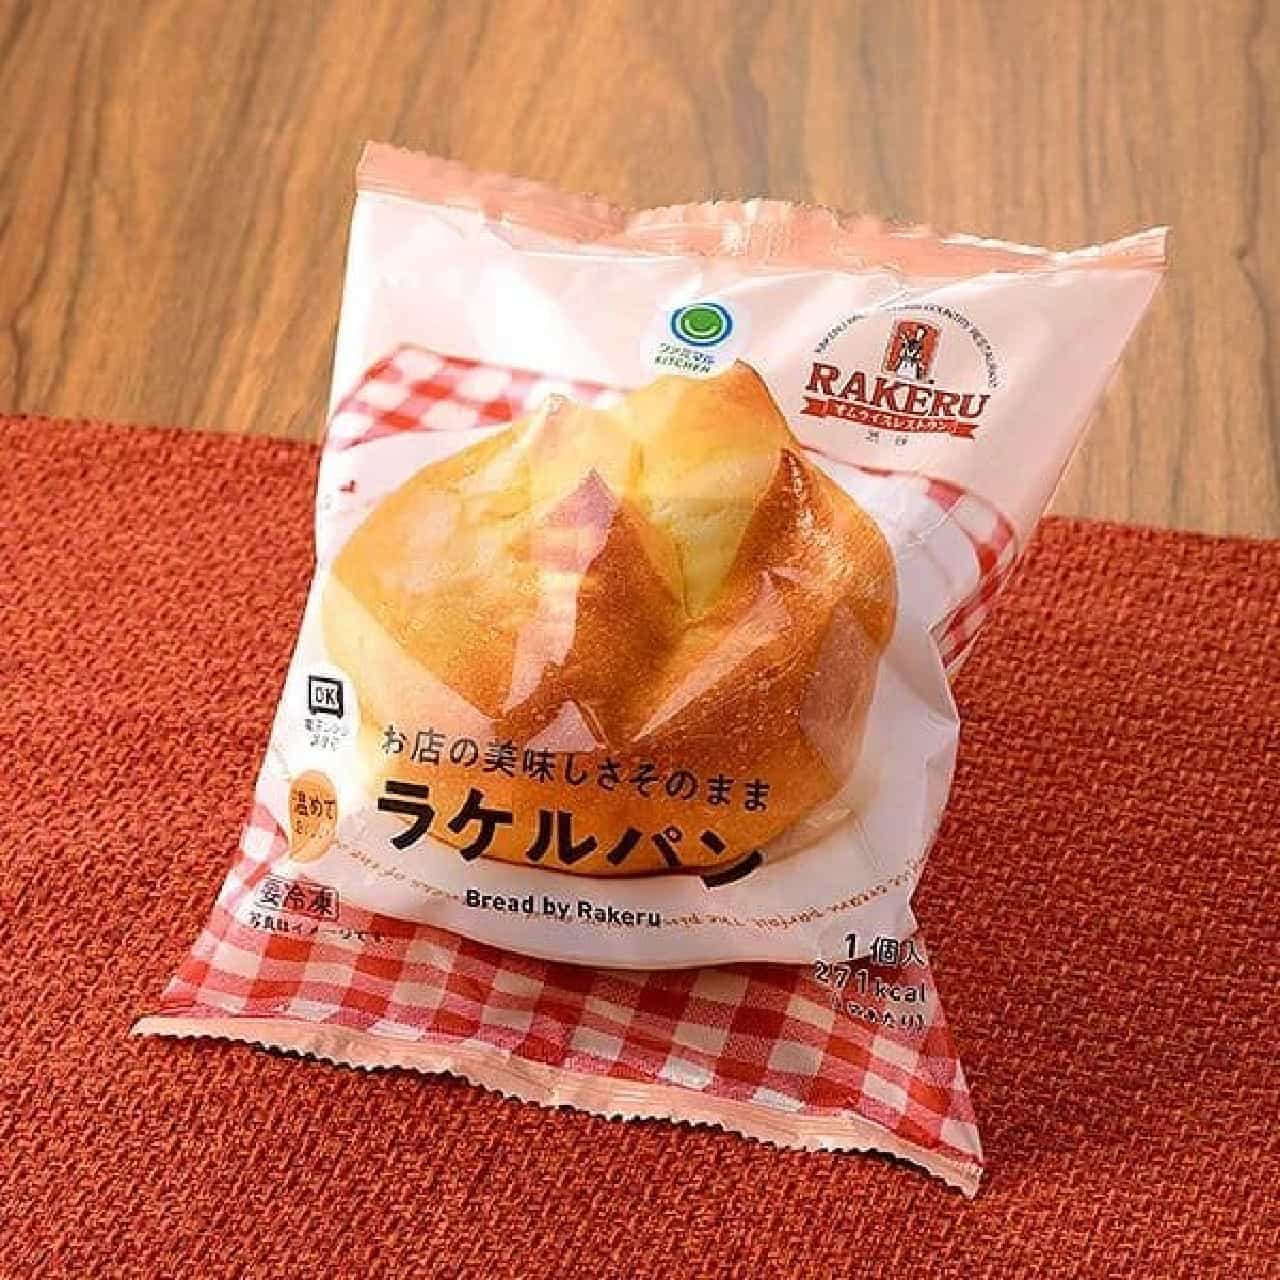 FamilyMart "Raquel Bread with the same great taste as the store".